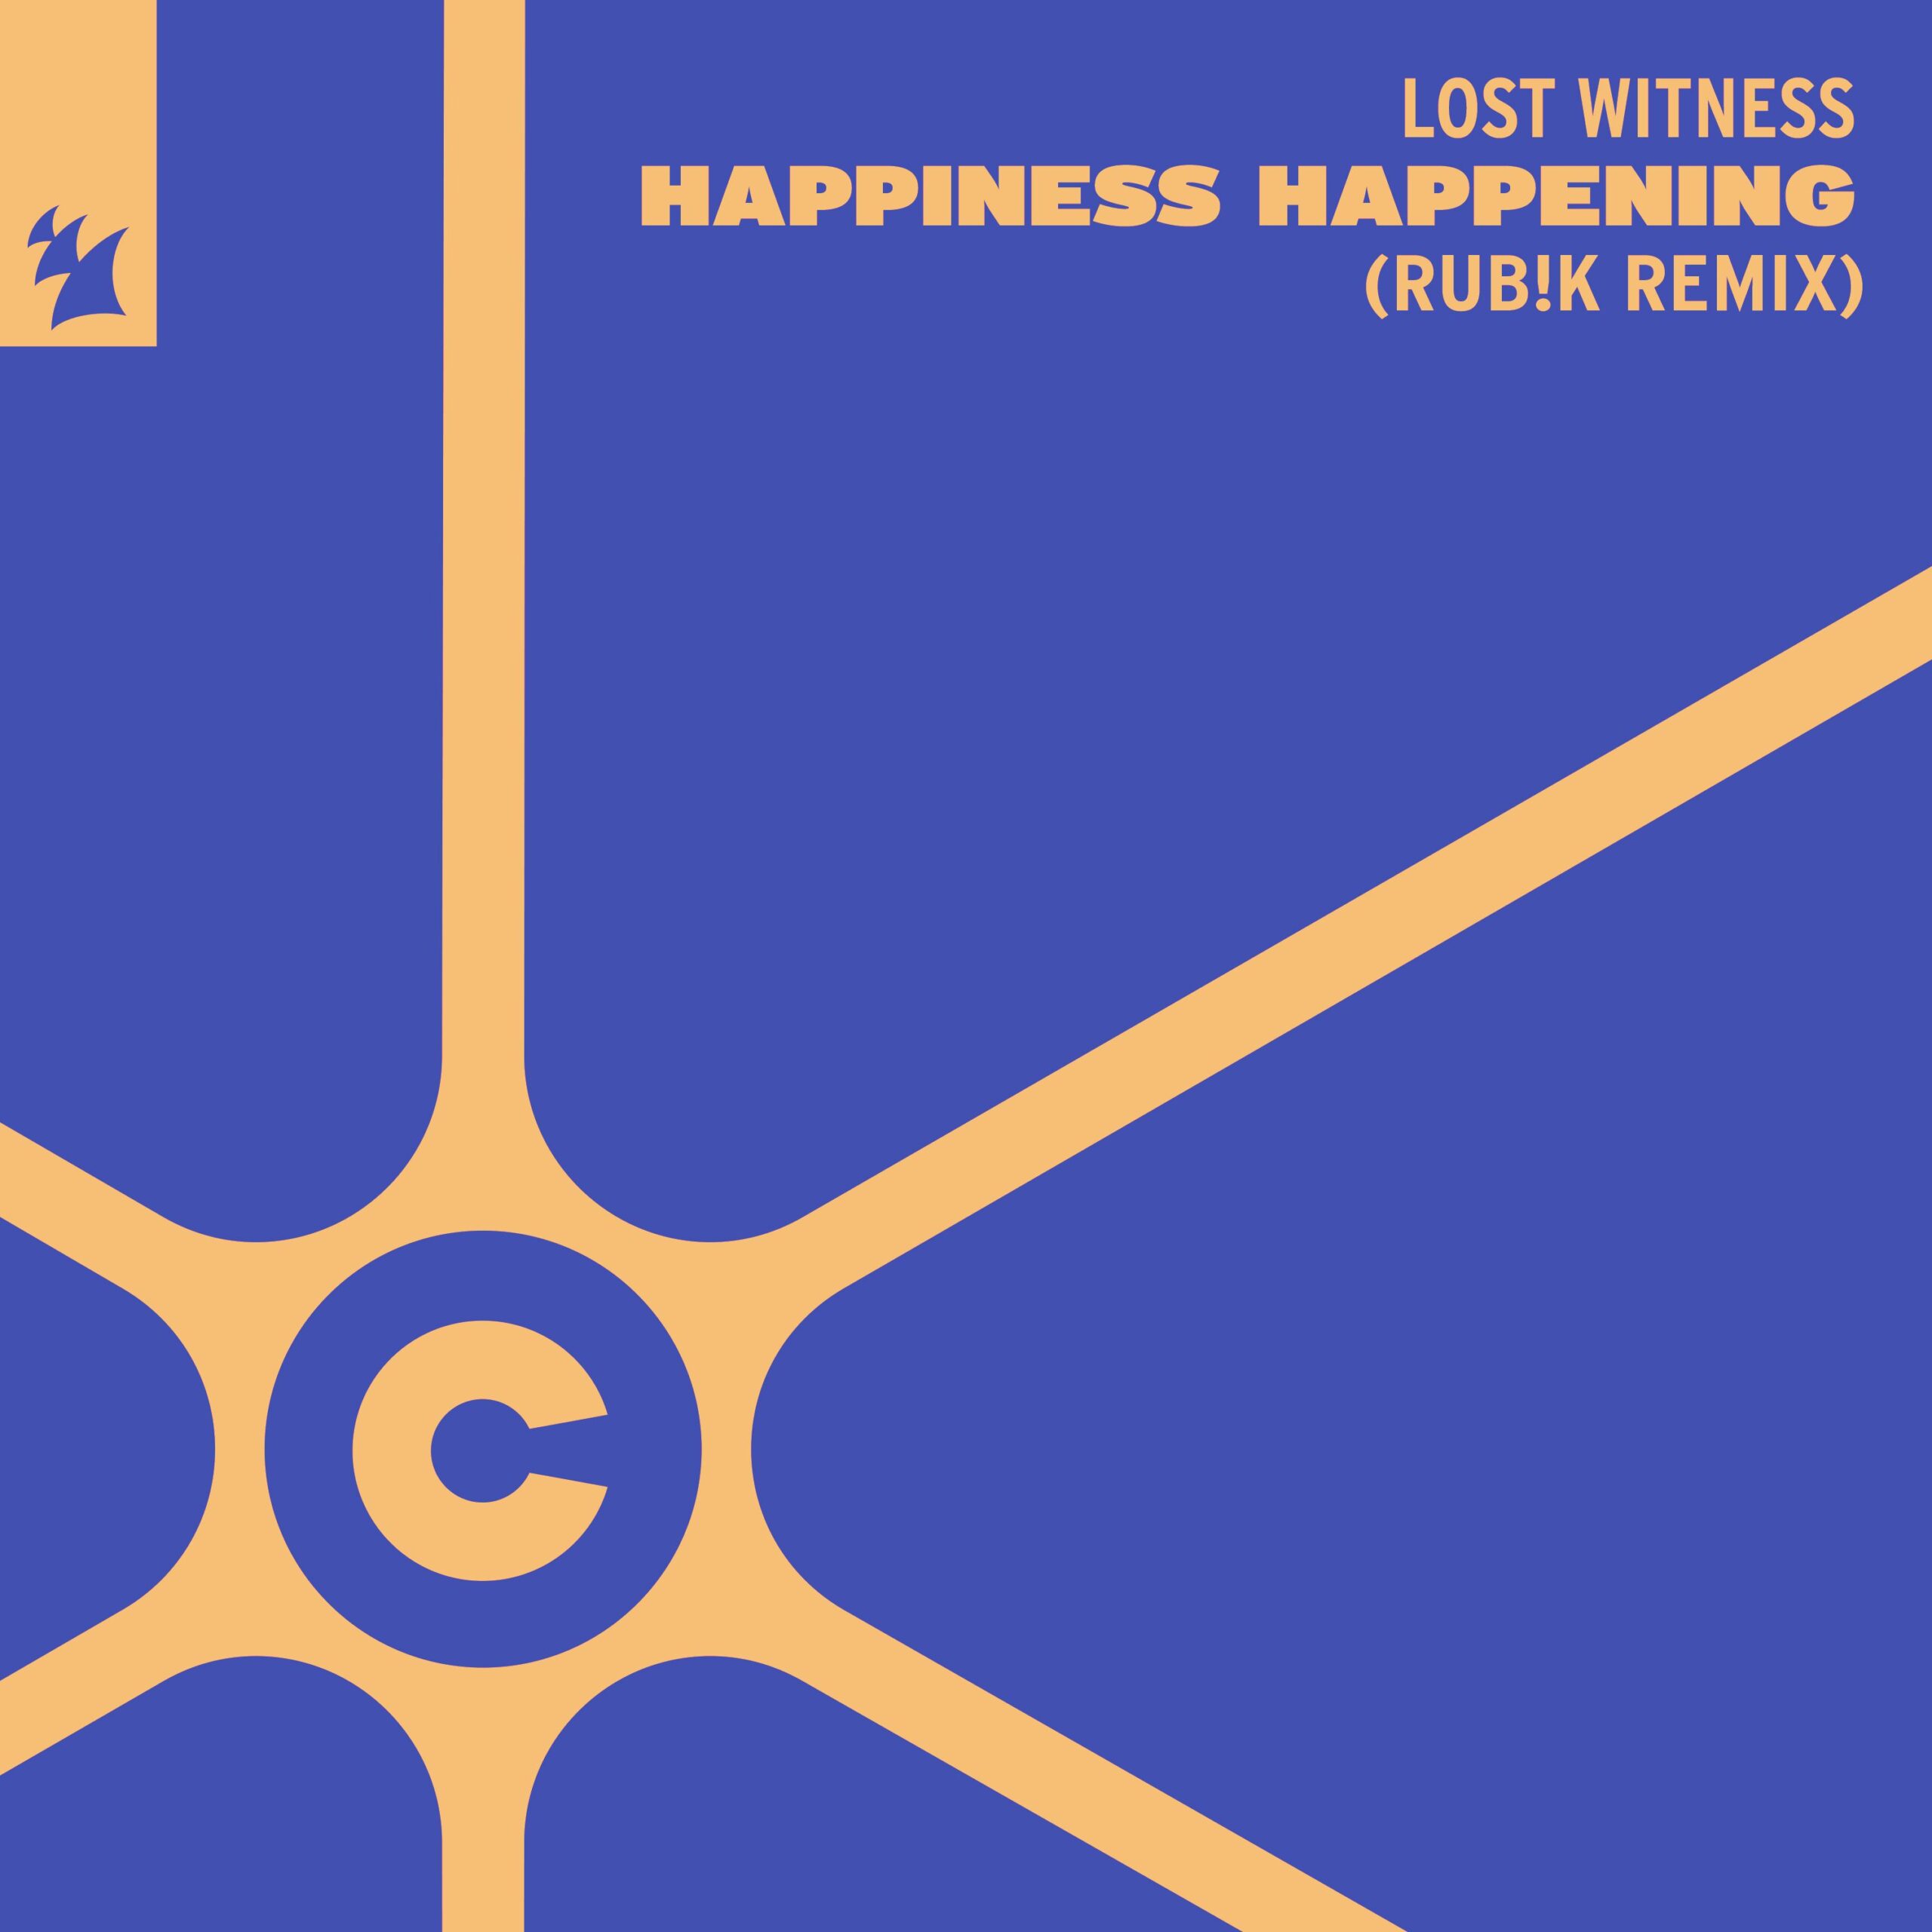 Lost Witness presents Happiness Happening (Rub!k Remix) on Captivating